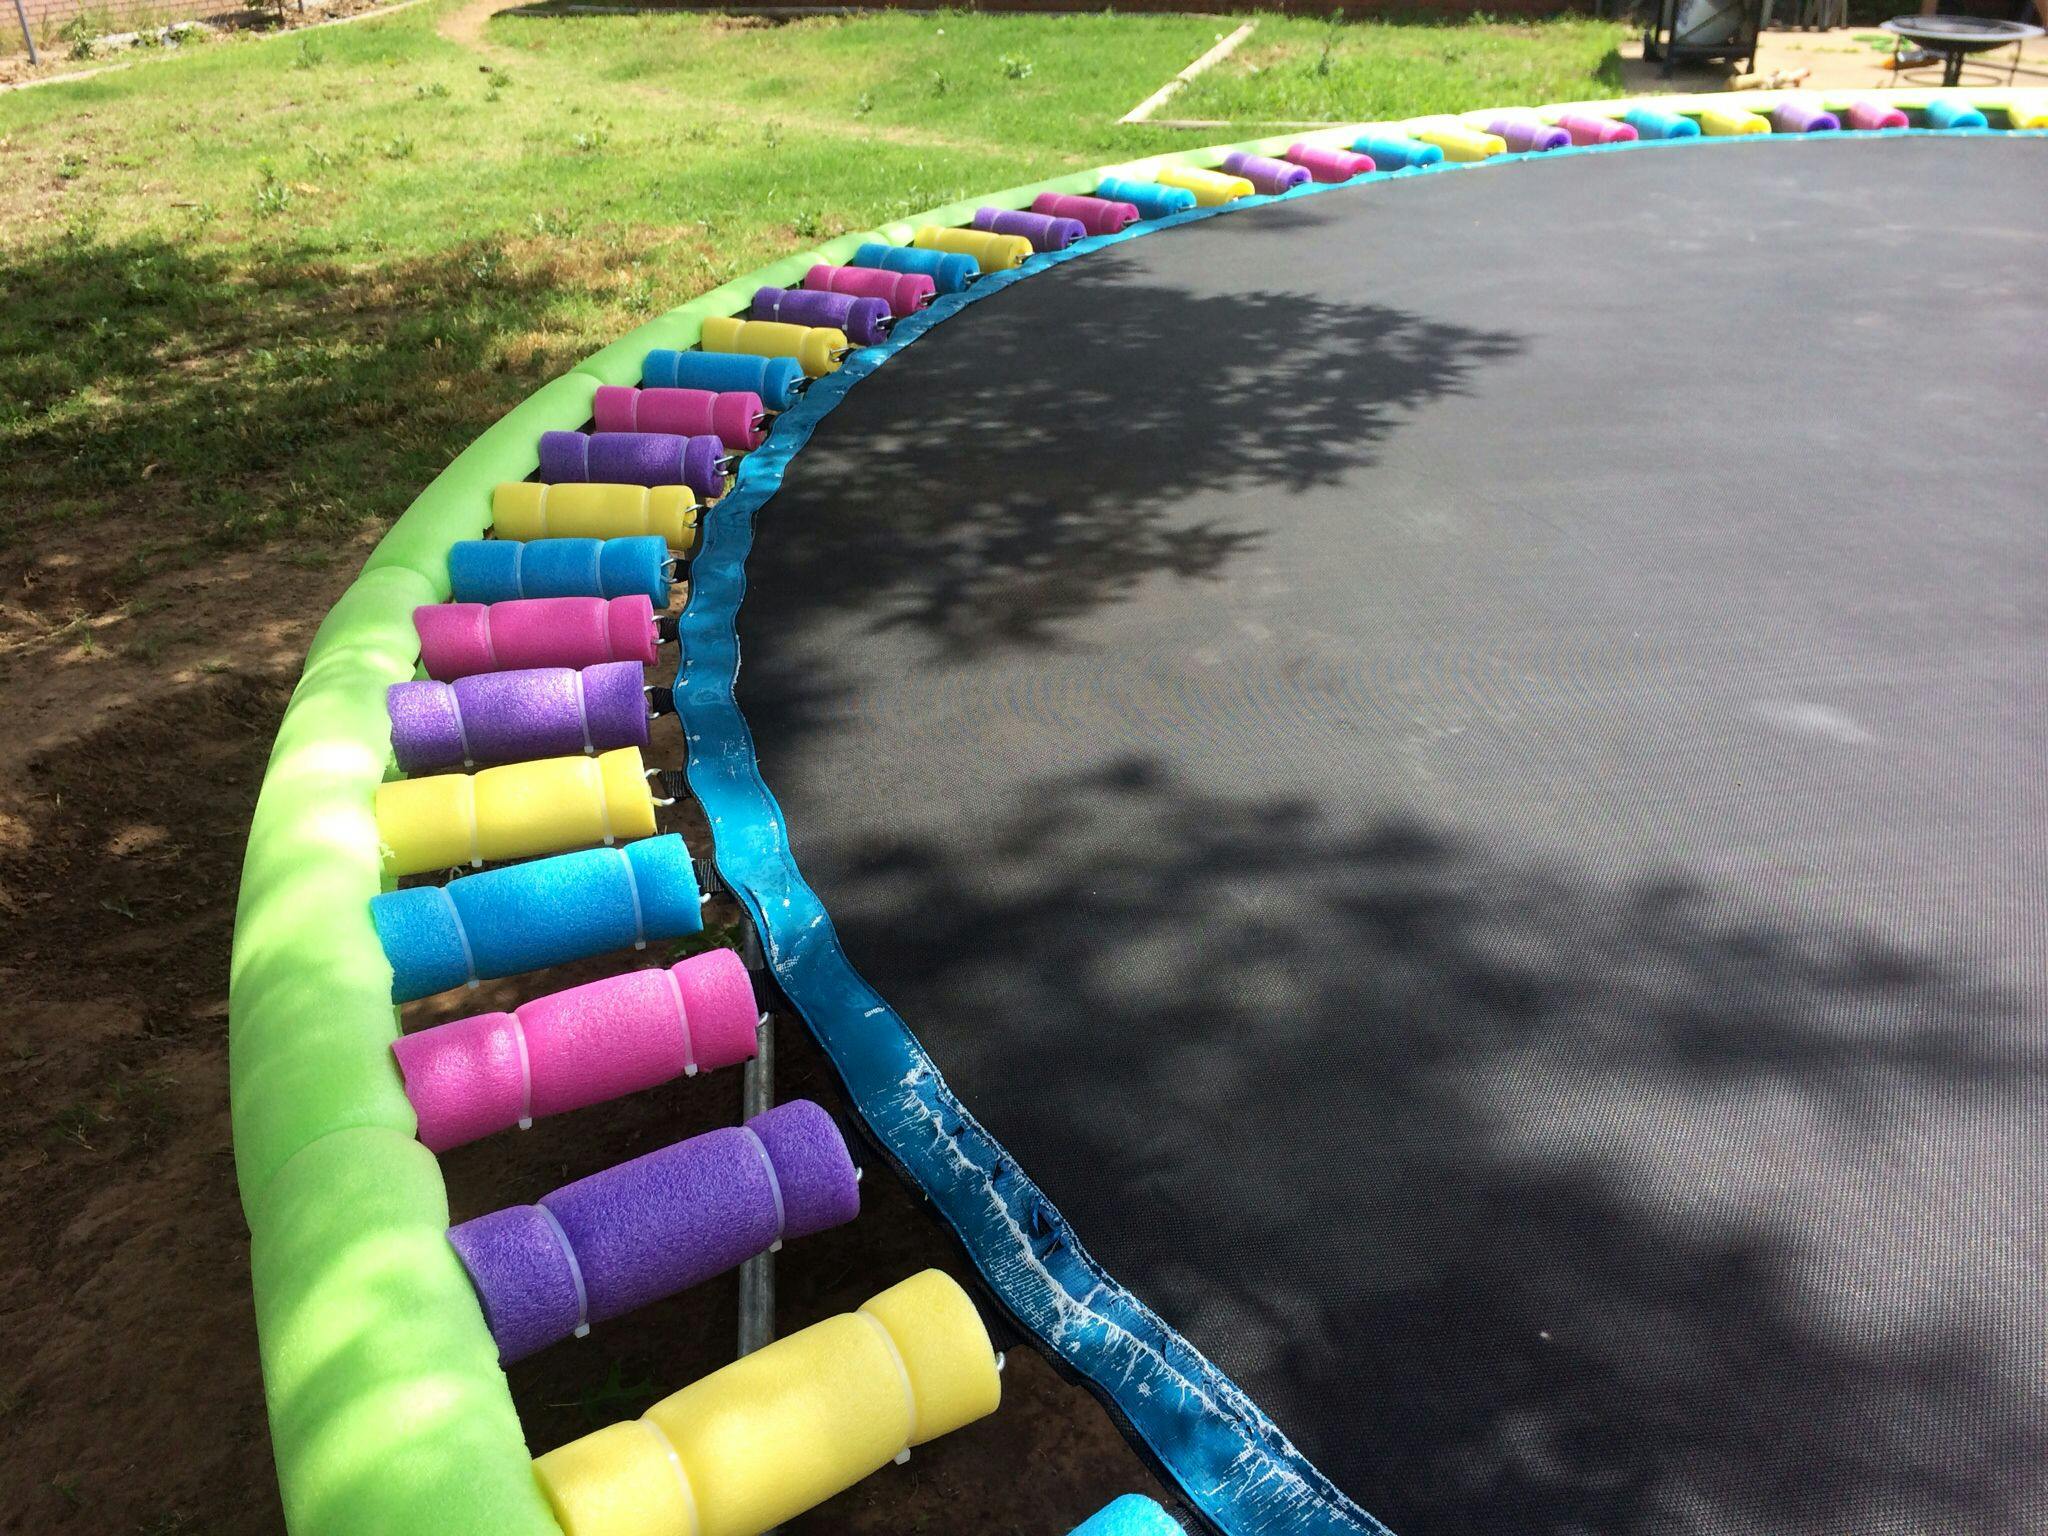 Attach pool noodles to a trampoline for safety.